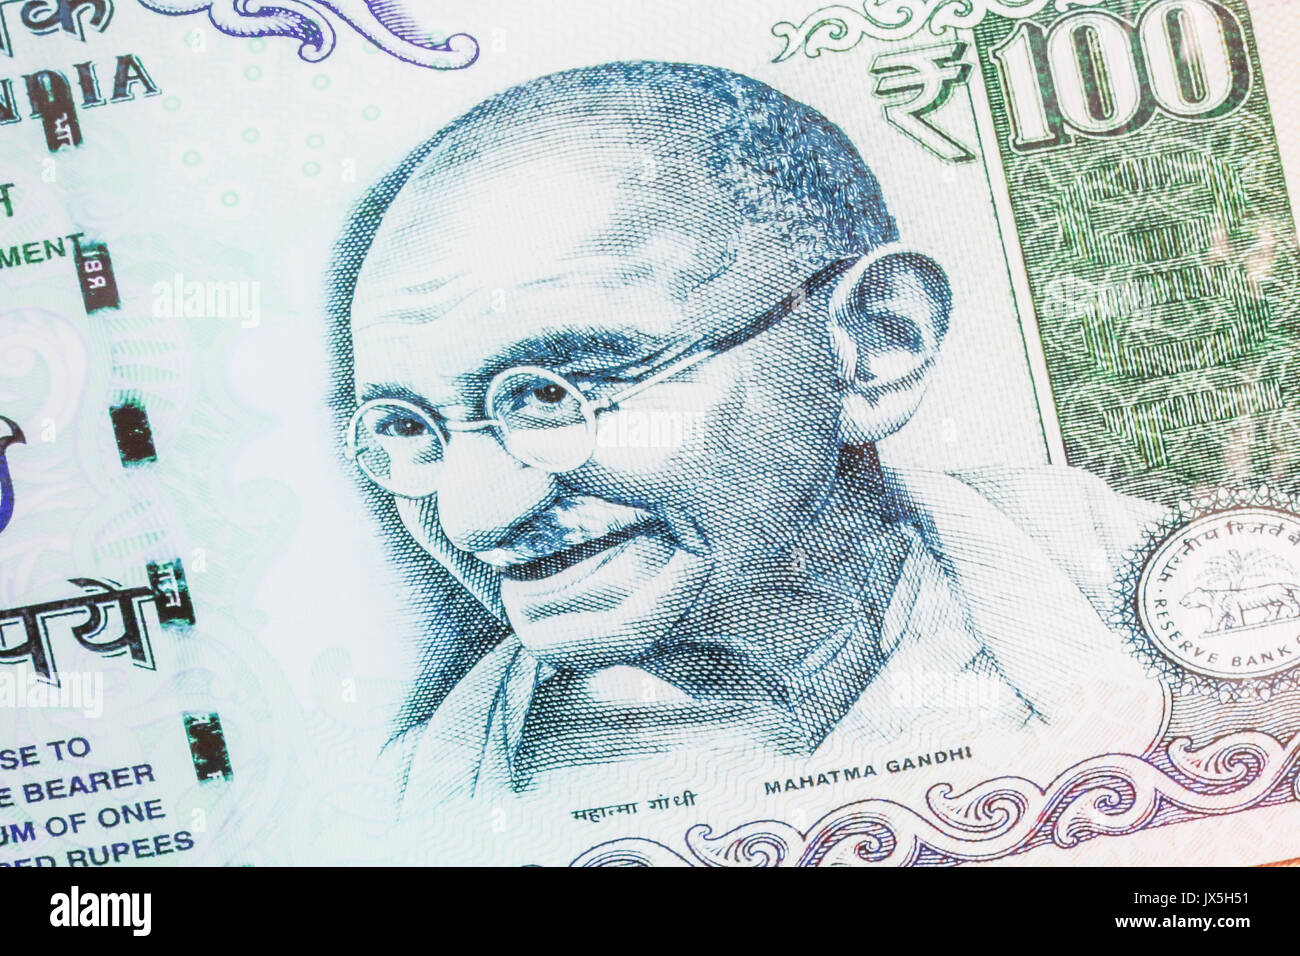 London, UK. 15th August 2017. The face of the founder of modern India Mahatma Gandhi on the cover of Indian bank notes outside a currency exchange shop in Southall. The Indian and Pakistan community in Southall West London prepare to commemorate the 70th anniversary of India and Pakistan independence from colonial Britain in 1947 Credit: amer ghazzal/Alamy Live News Stock Photo